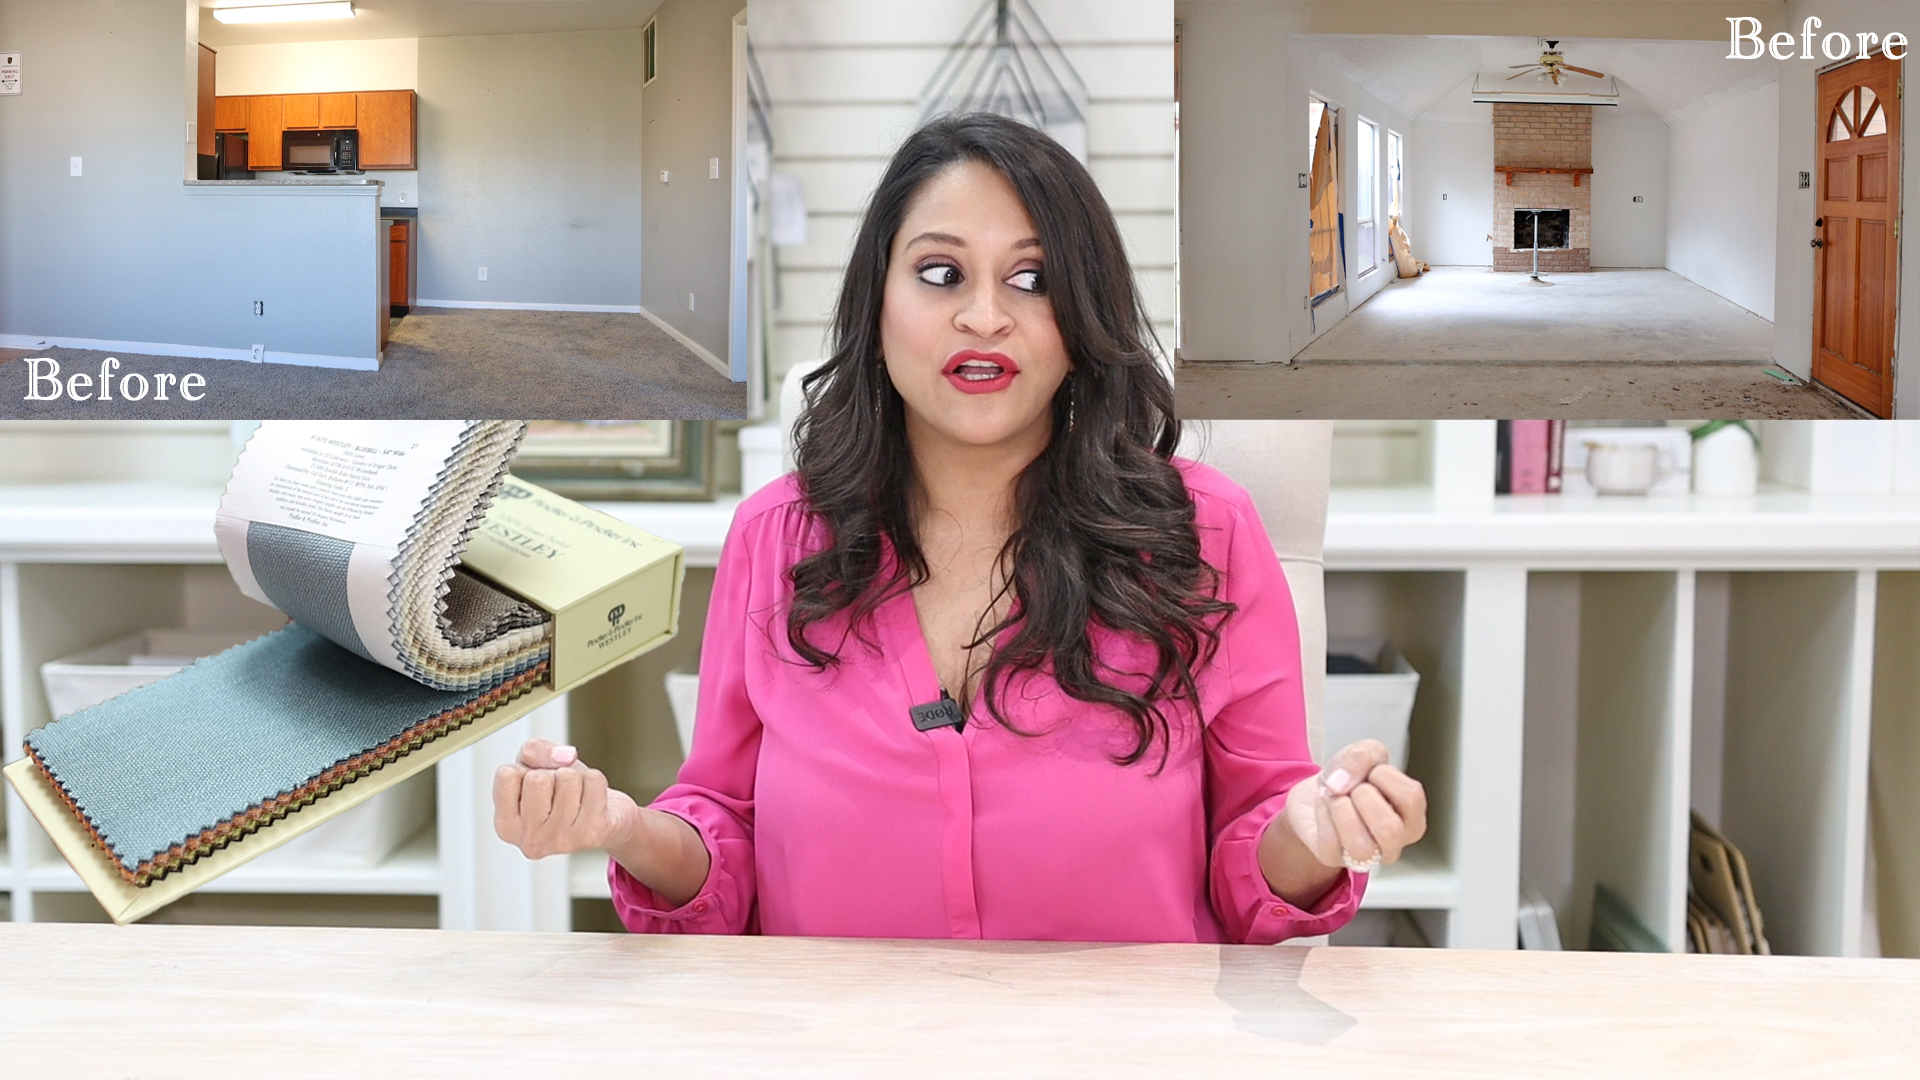 Amitha Verma's farmhouse designs are going full force for 2022 with major renovation makeovers and design transformations on YouTube.